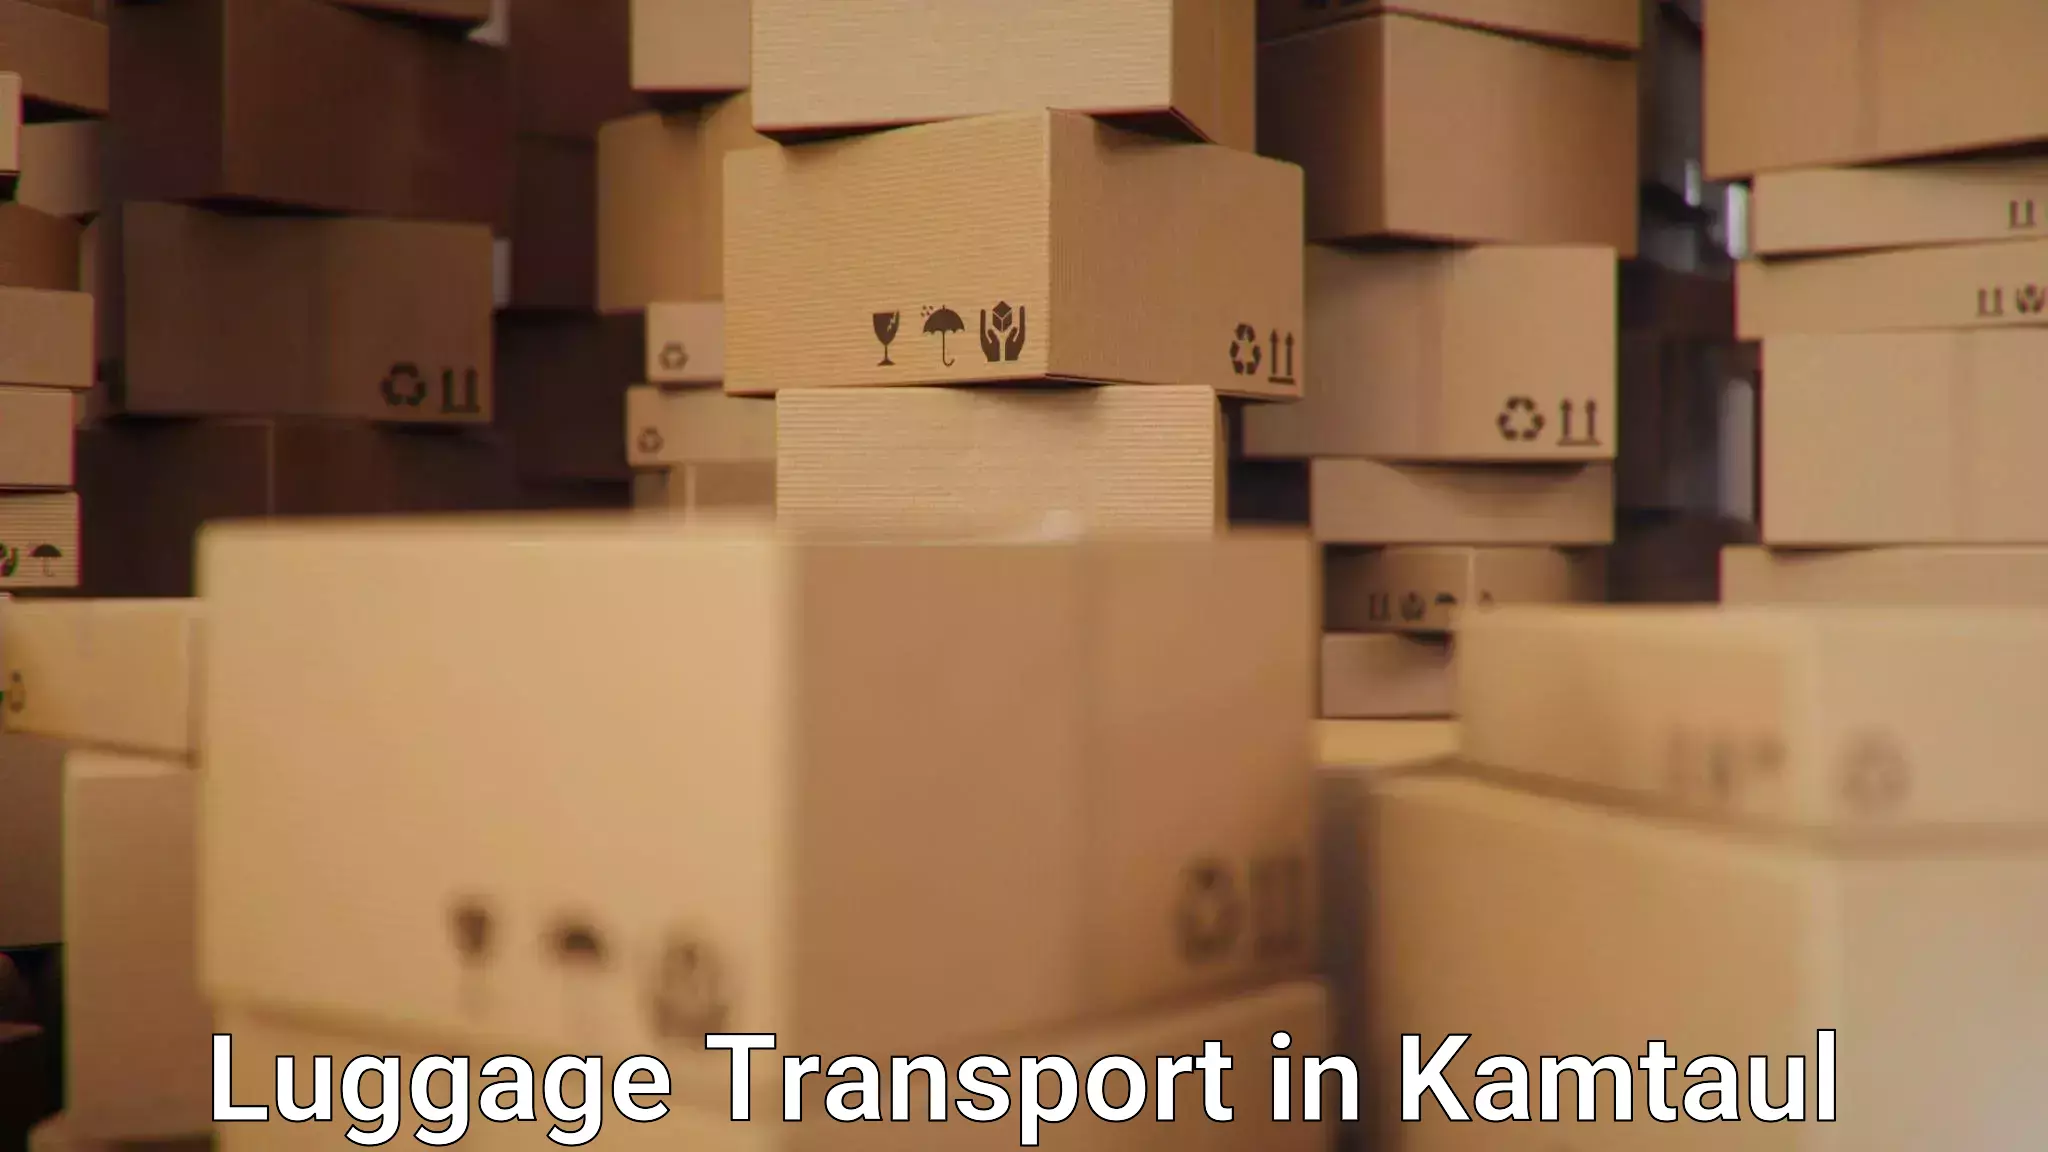 Luggage transport solutions in Kamtaul